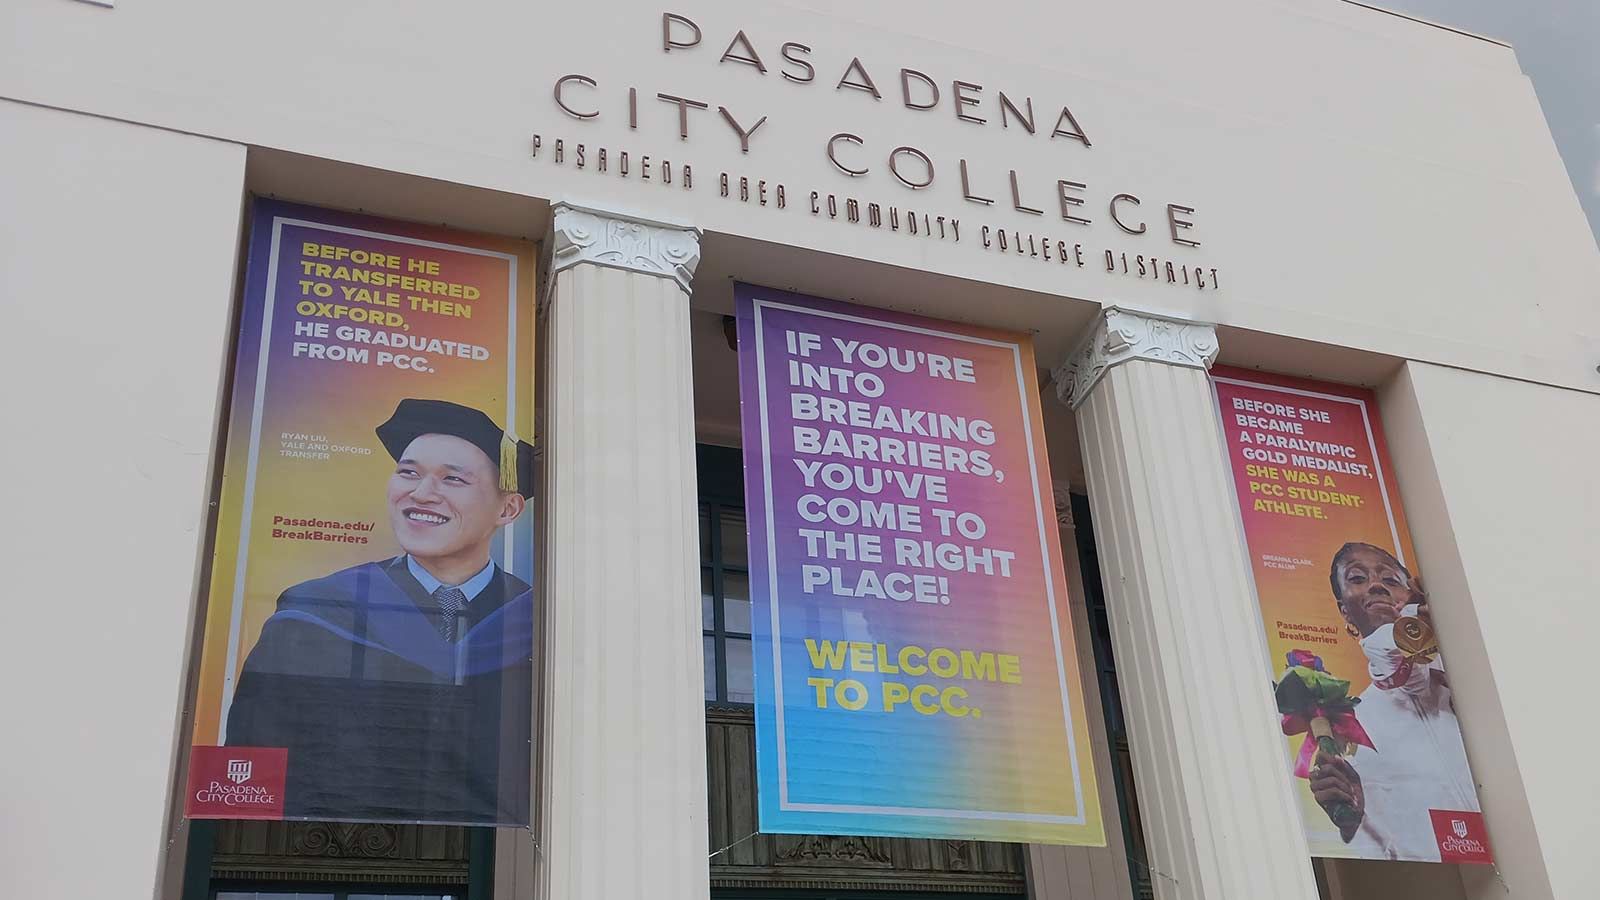 Pasadena City College banners installed at the entrance